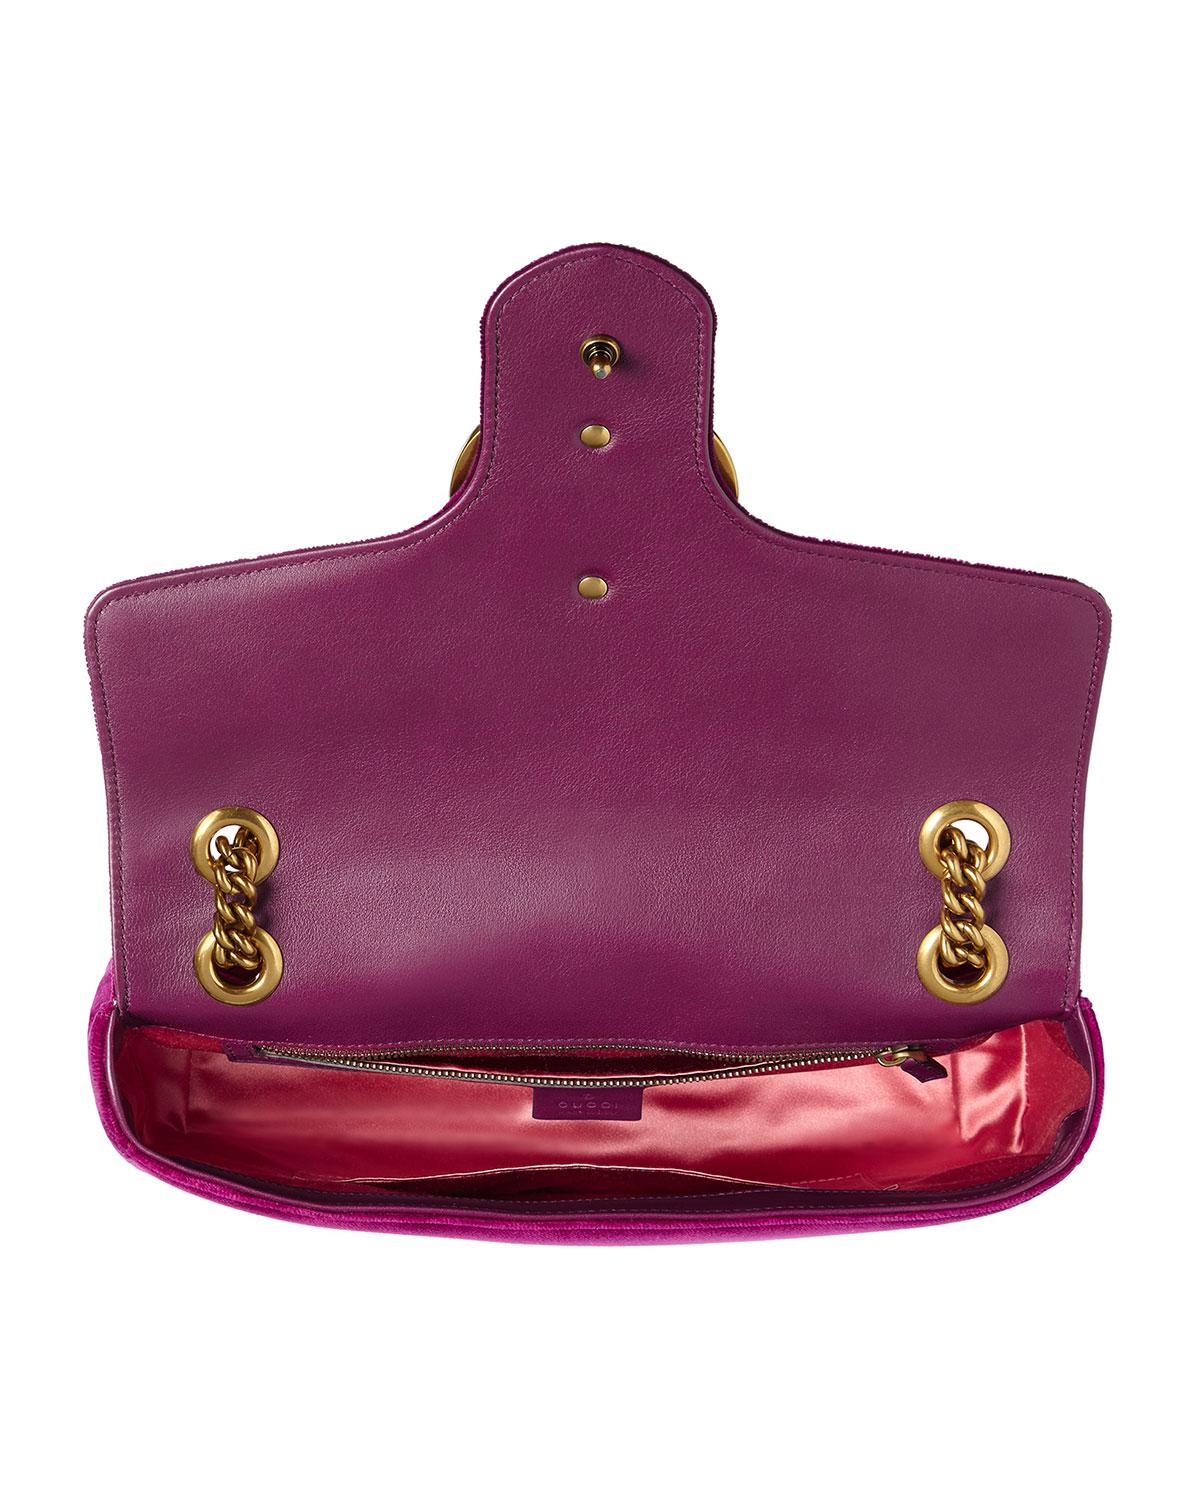 Gucci Velvet Gg Marmont 2.0 Small Loved Shoulder Bag in Fuchsia (Purple) - Lyst